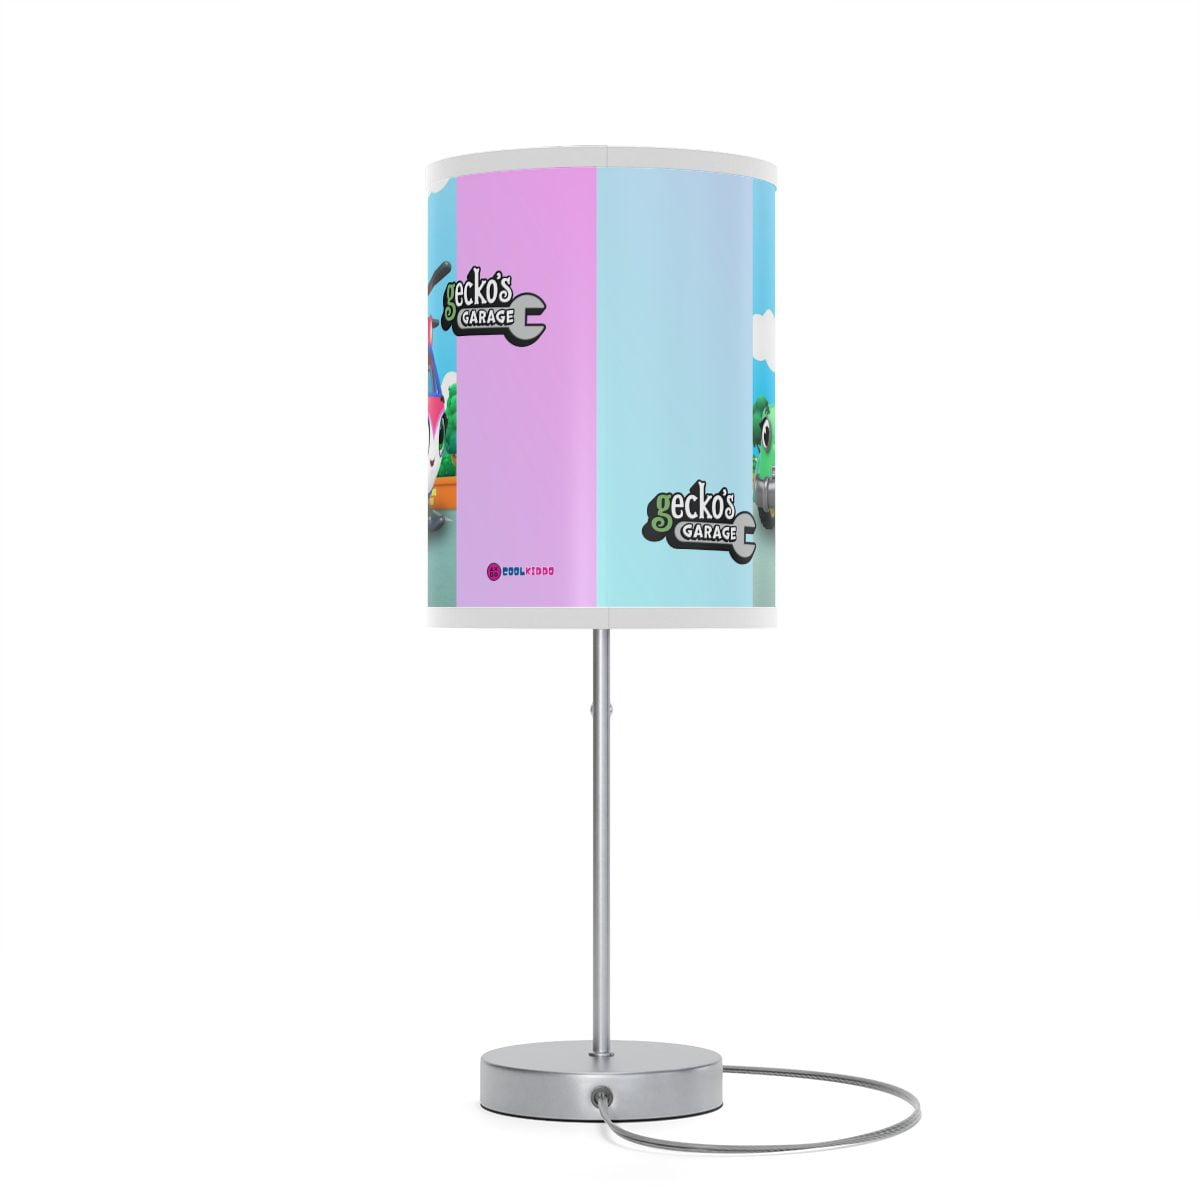 Gecko’s Garage Main Characters Lamp on a Stand Cool Kiddo 24